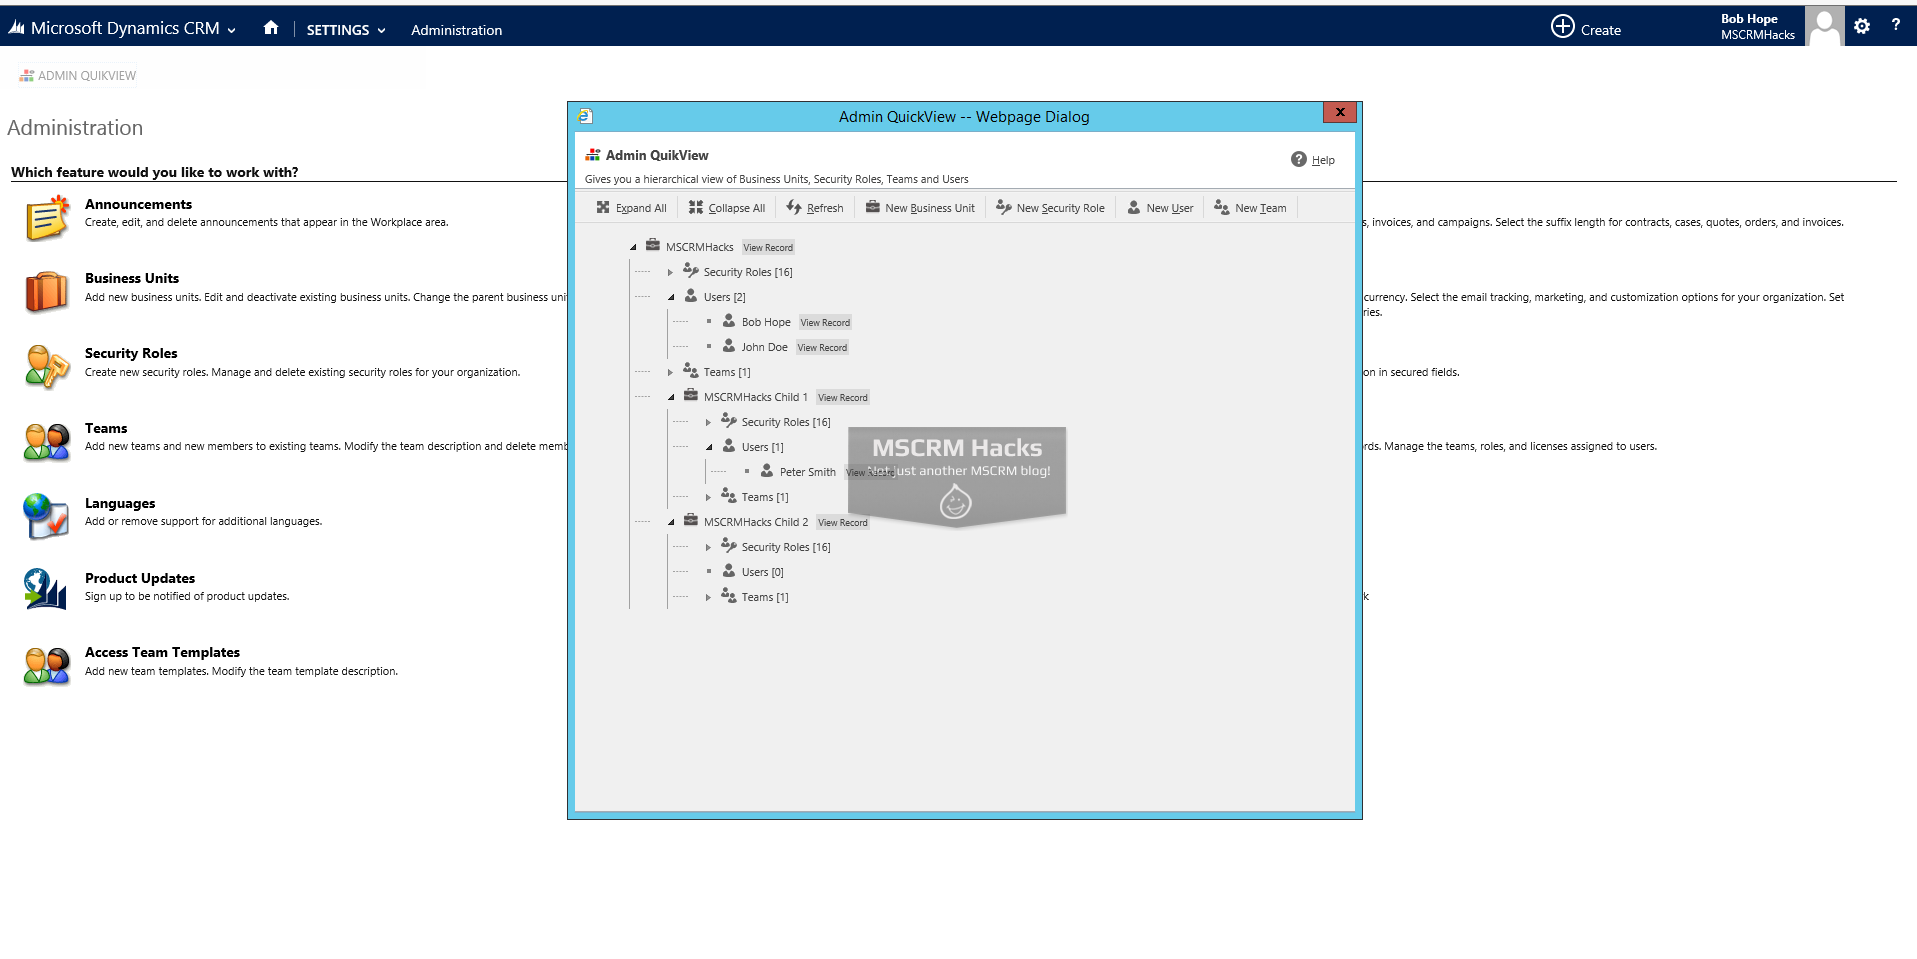 Admin QuikView Solution for CRM 2013 - Image 02